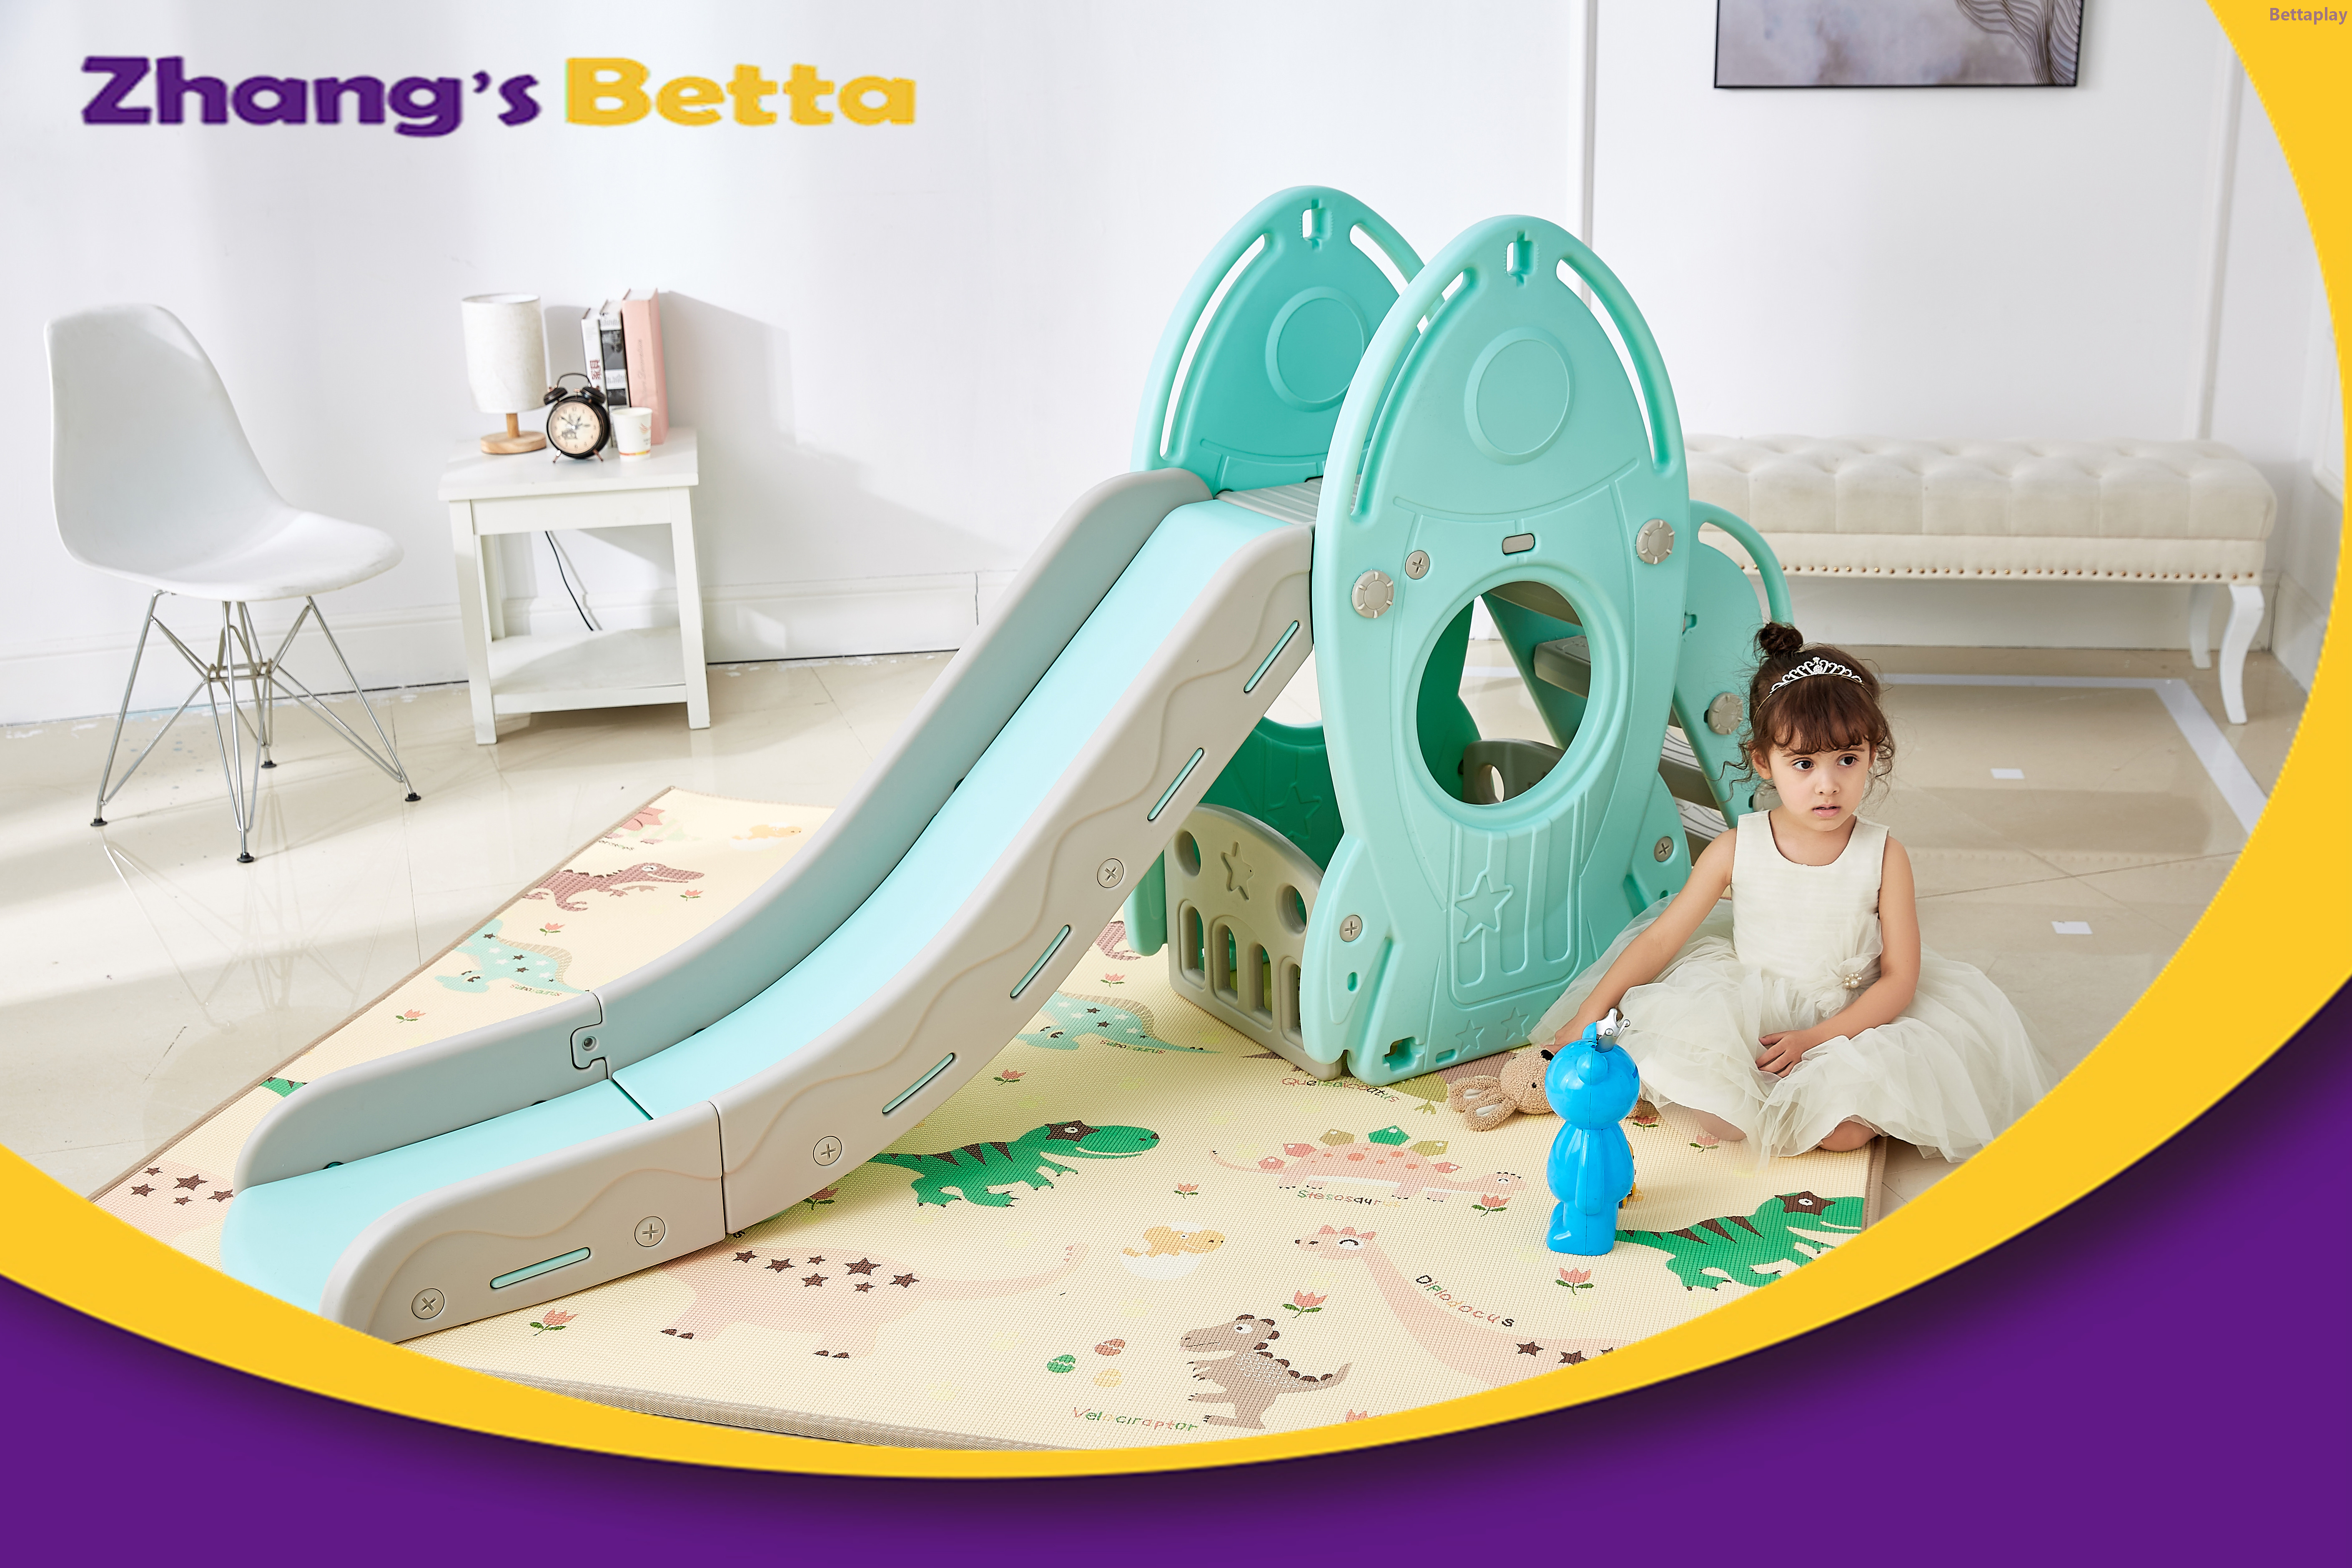 Pastel Home Stay New Design Best Quality & Plastic Children Slide with Hoop Outdoor Playground Equipment For Own Use